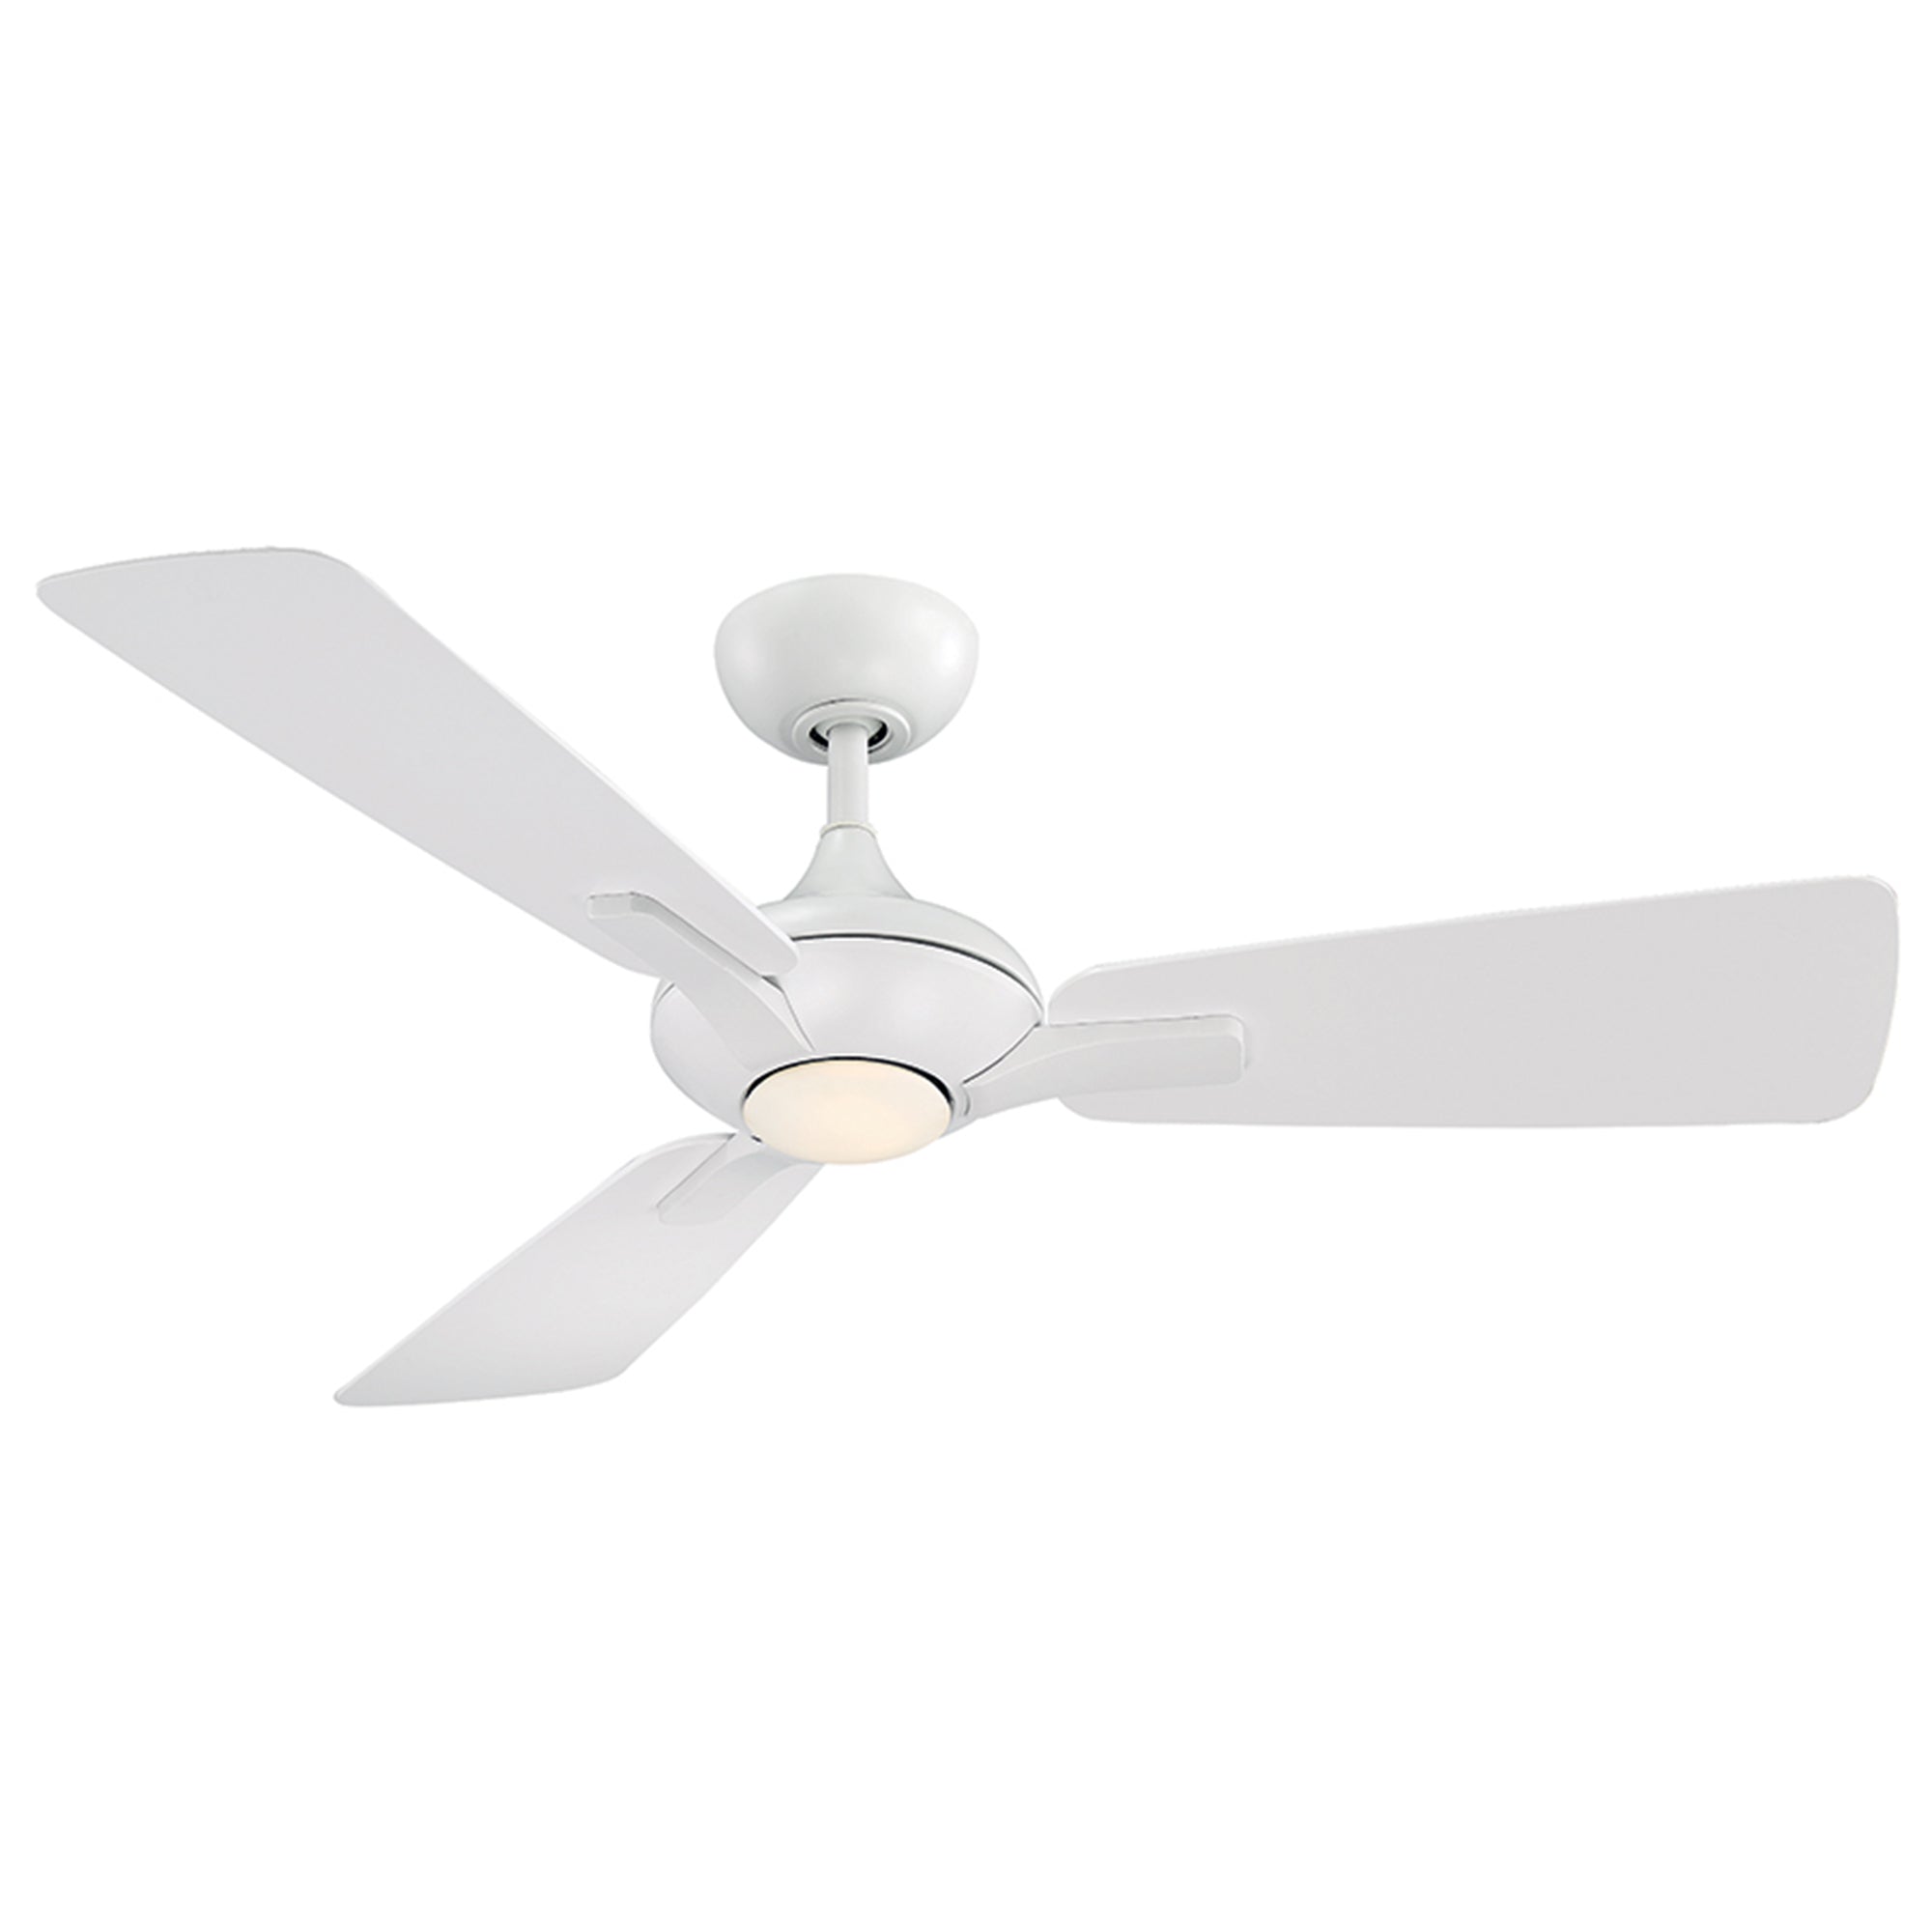 Mykonos 3 Indoor/Outdoor 3-Blade 52" Smart Ceiling Fan with LED Light Kit and Remote Control